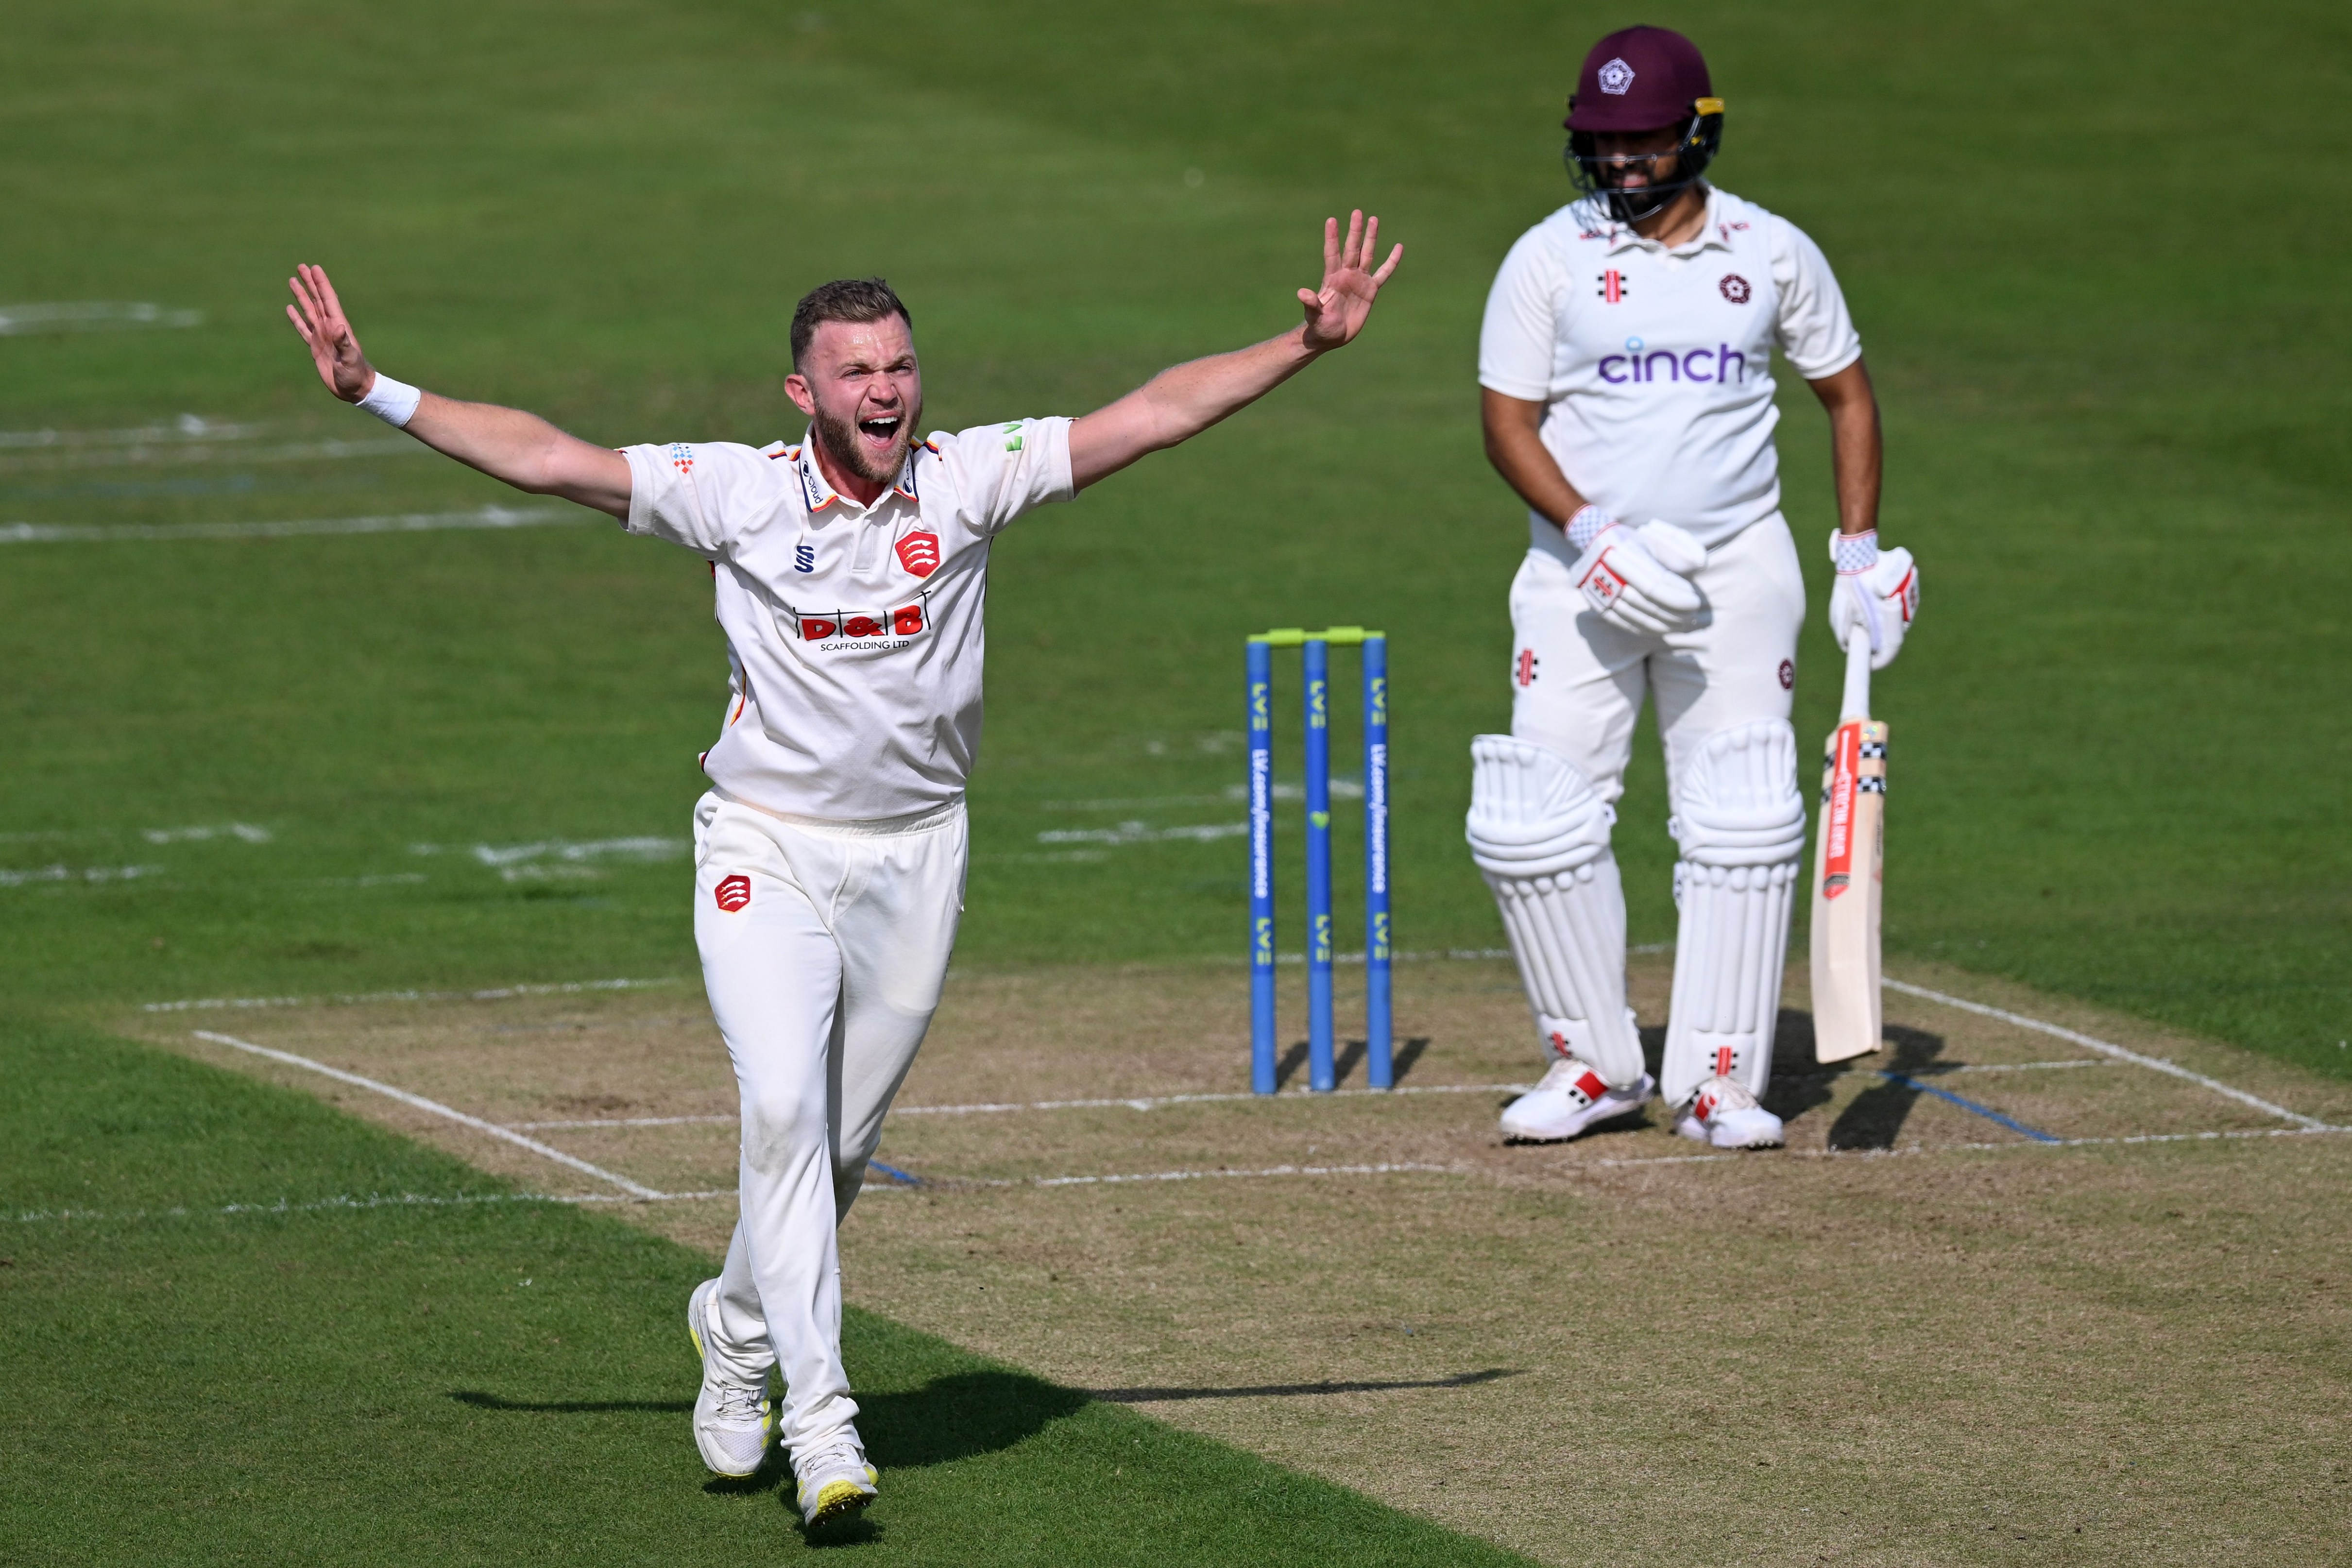 Kookaburra wickets and praise from Key – have England found new seamer?